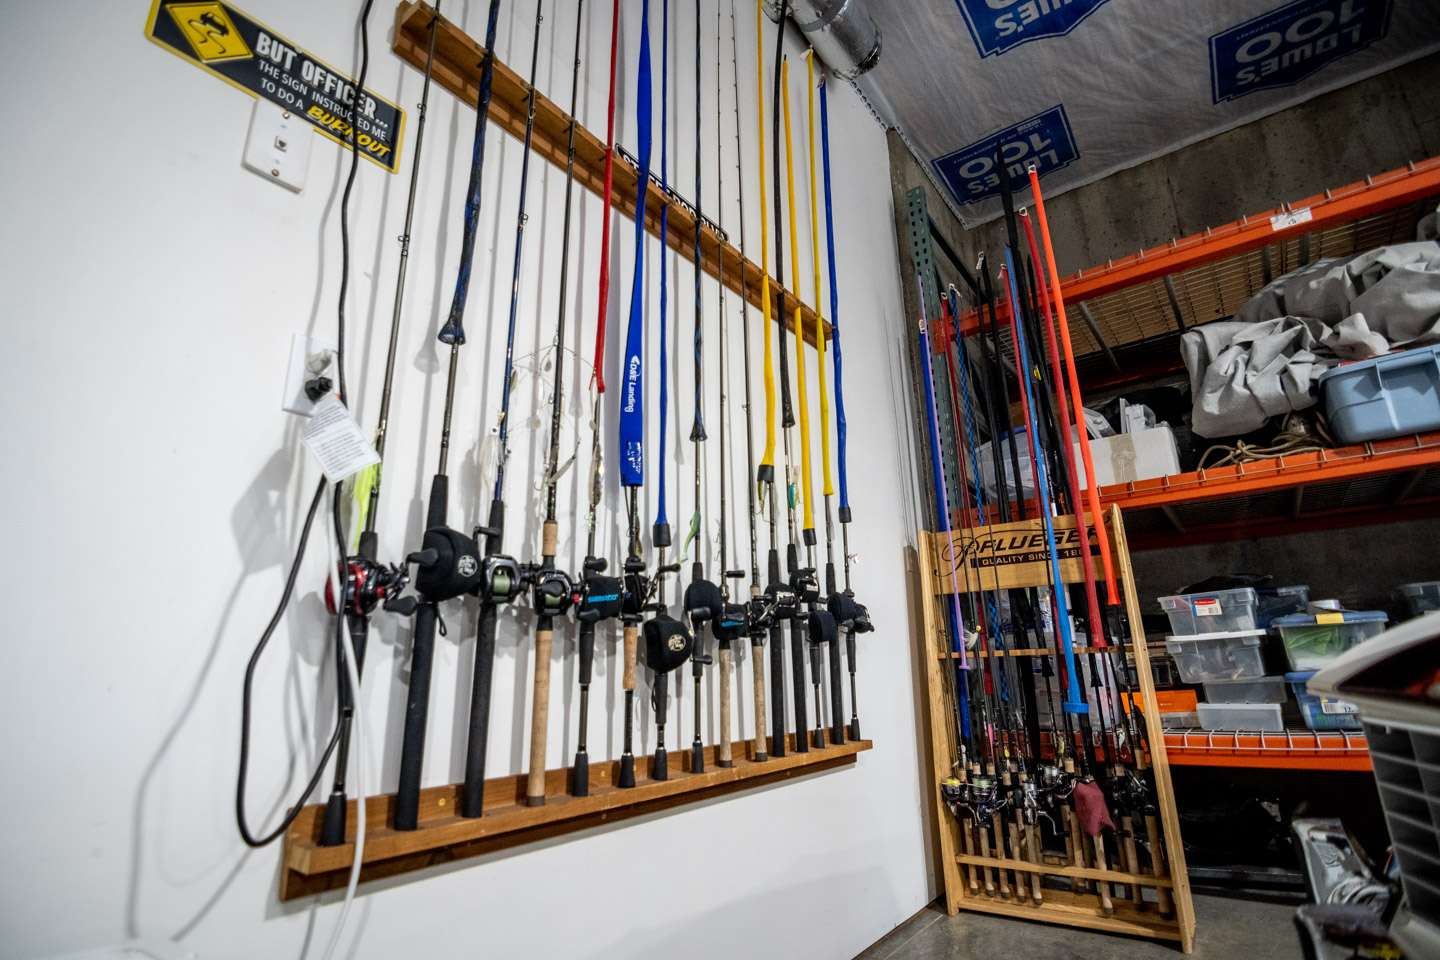 Towards the back of the shop, Auten has several racks to hold a variety of fishing rods. 